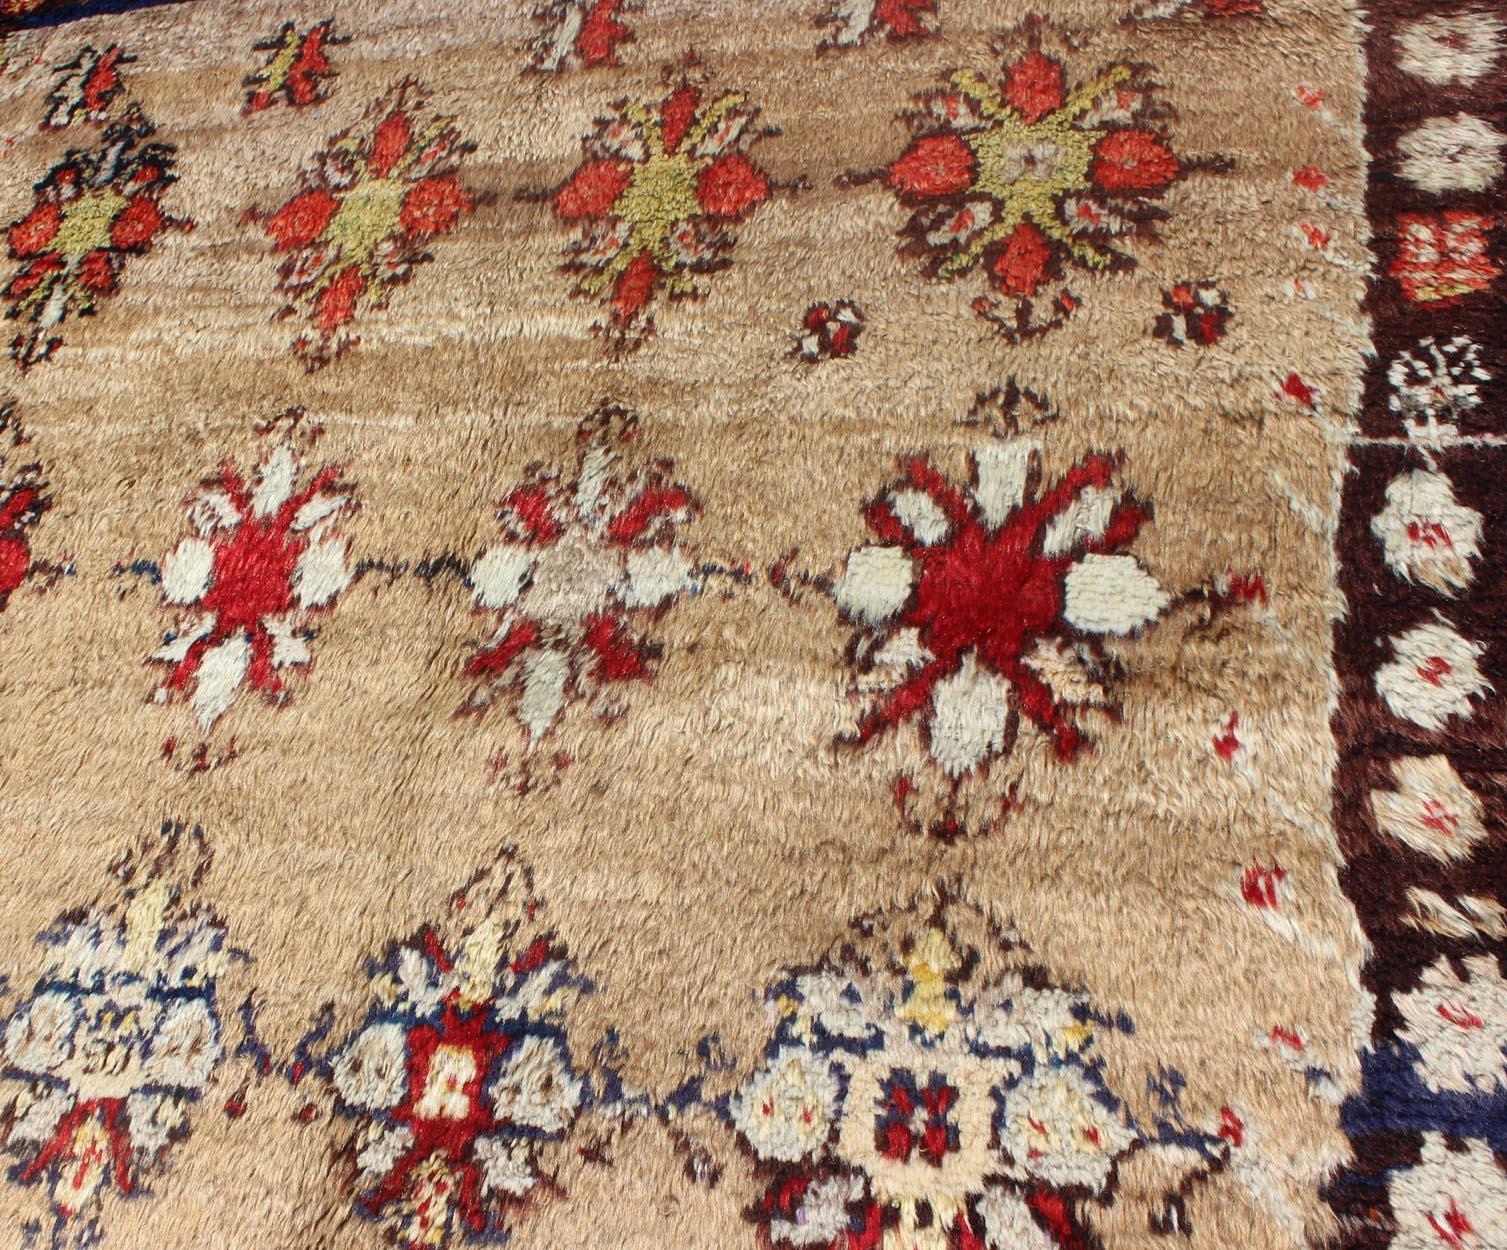 Angora Turkish Tulu Carpet with Colorful Floral Designs Set on Sand Field For Sale 2